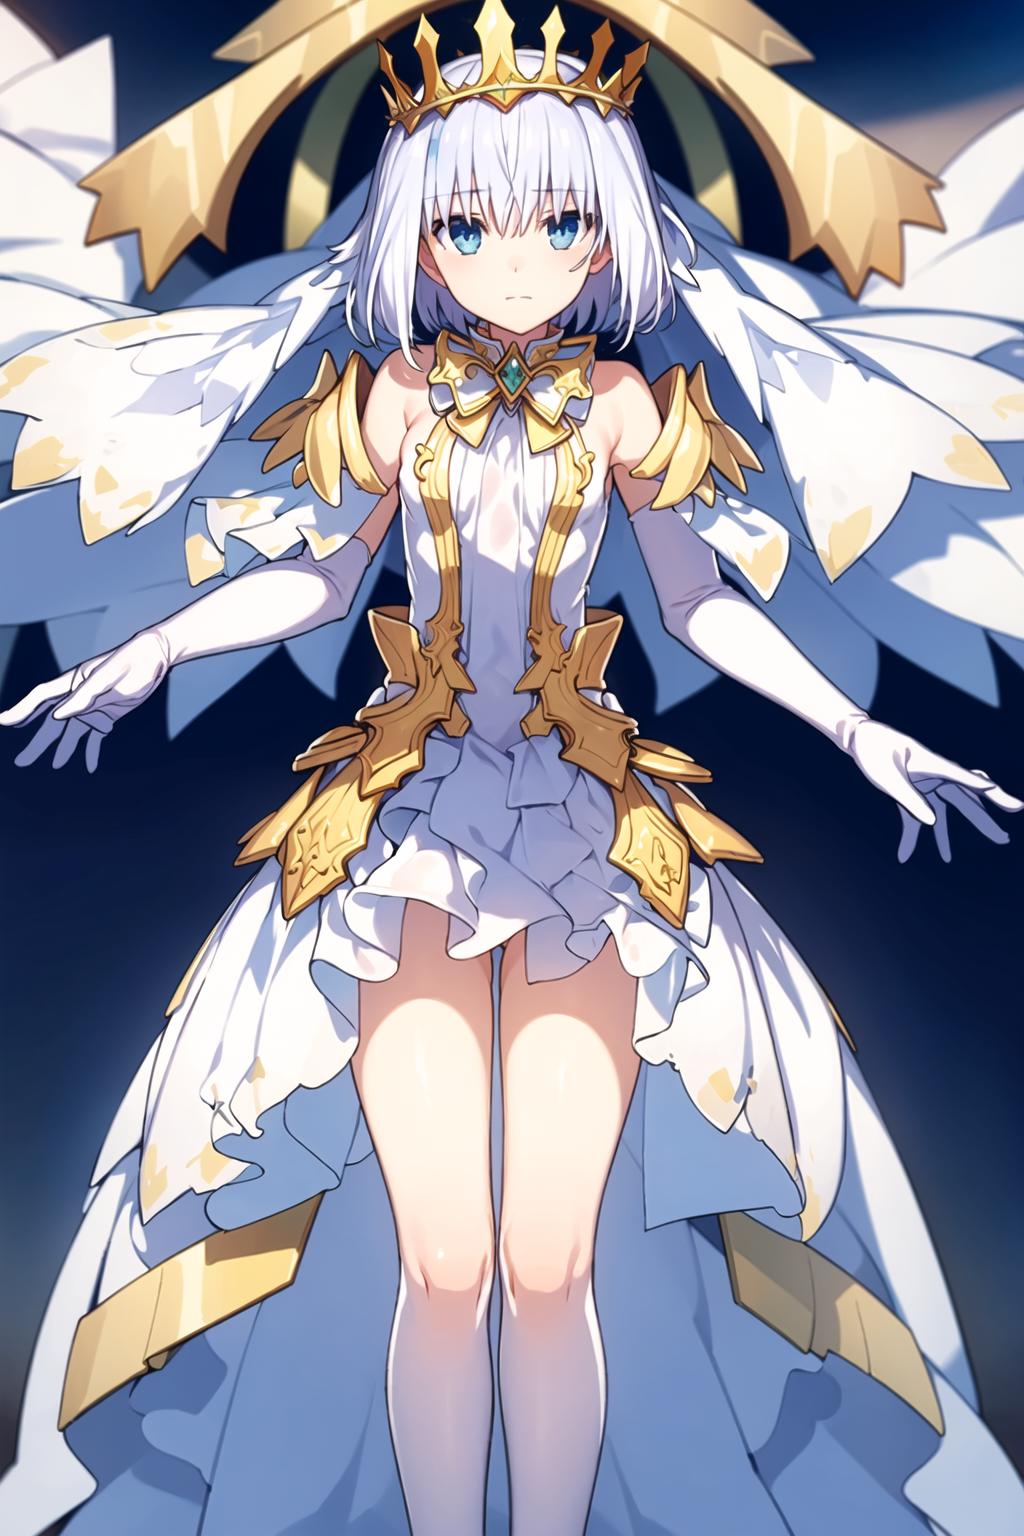 Tobiichi Origami | Date a Live image by Maisman